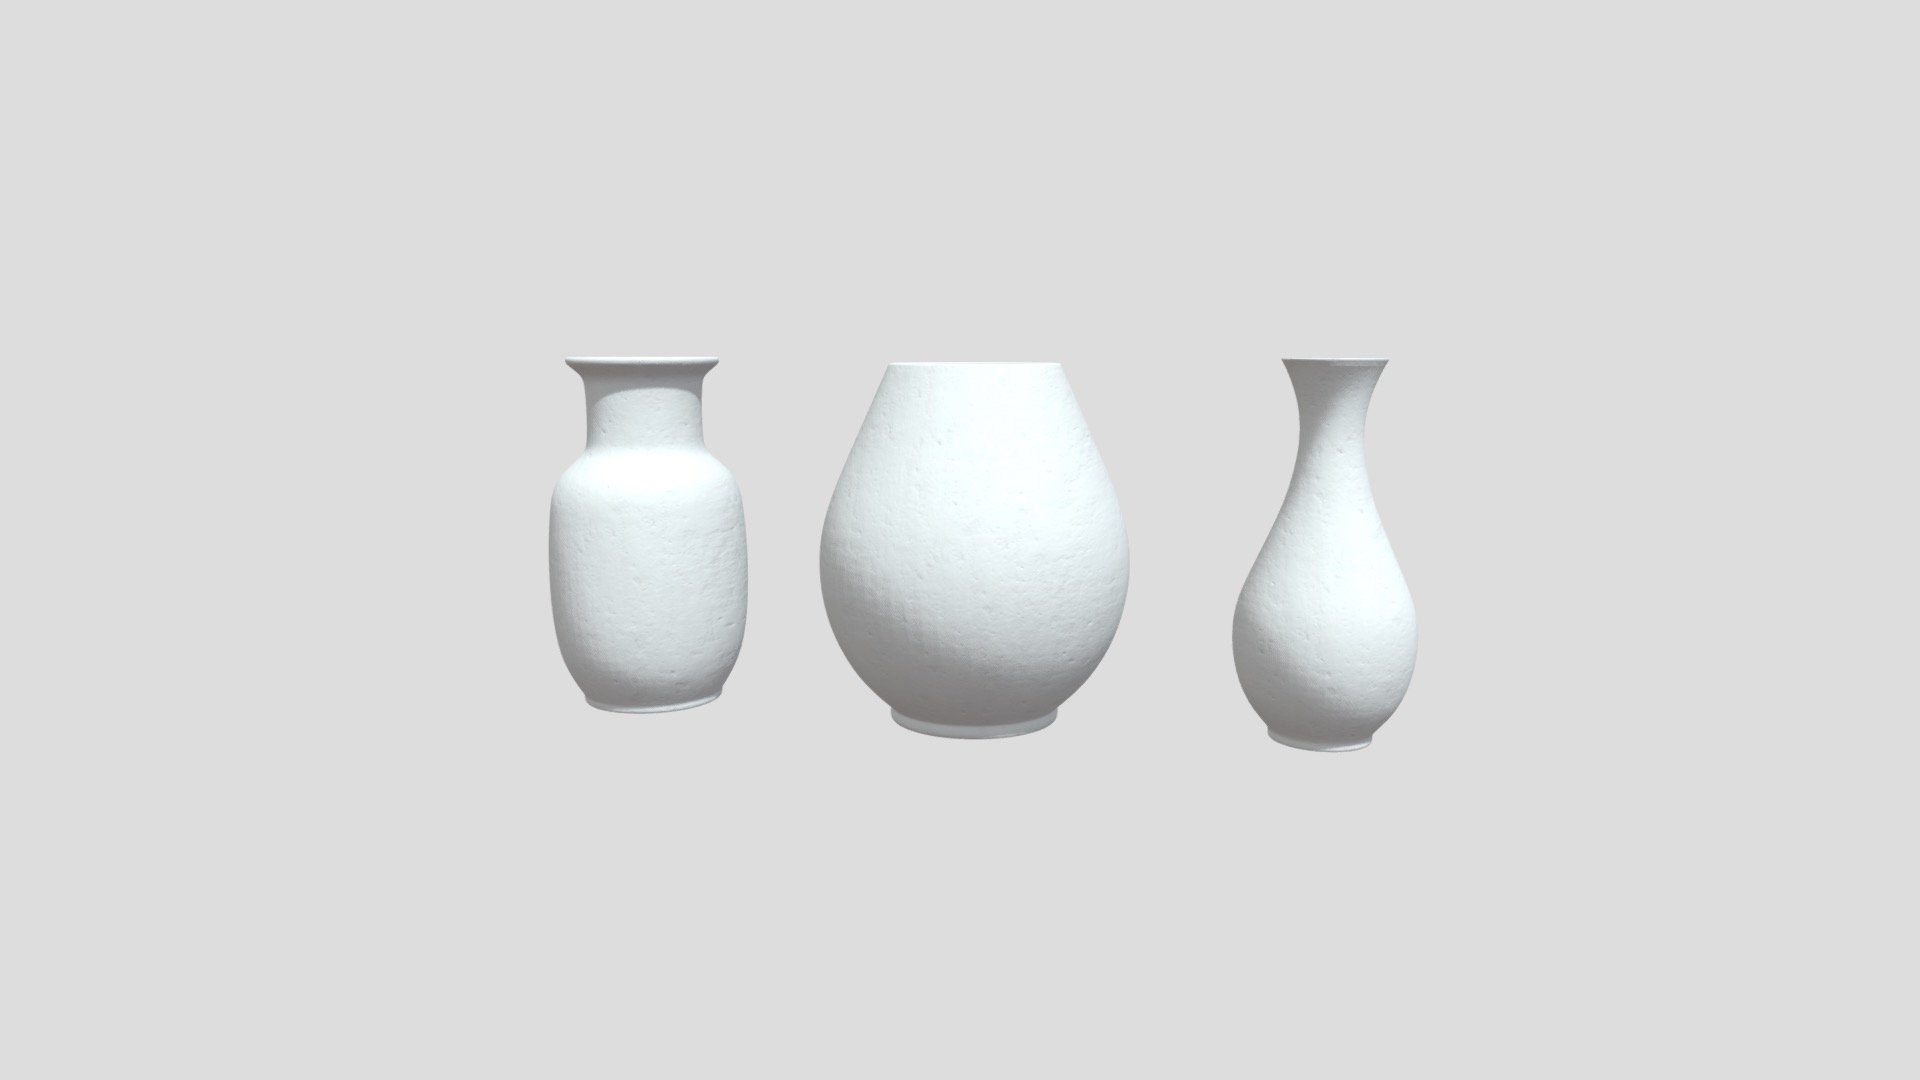 Textures: 2048 x 2048, Two colors on texture: White and light gray colors.

Has Normal Map: 2048 x 2048.

Materials: 1 - Vase

Smooth shaded.

Non-Mirrored.

Subdivision Level: 1

Origin located on bottom-center.

Polygons: 33920

Vertices: 16966

Formats: Fbx.

I hope you enjoy the model! - Vase - Buy Royalty Free 3D model by Ed+ (@EDplus) 3d model